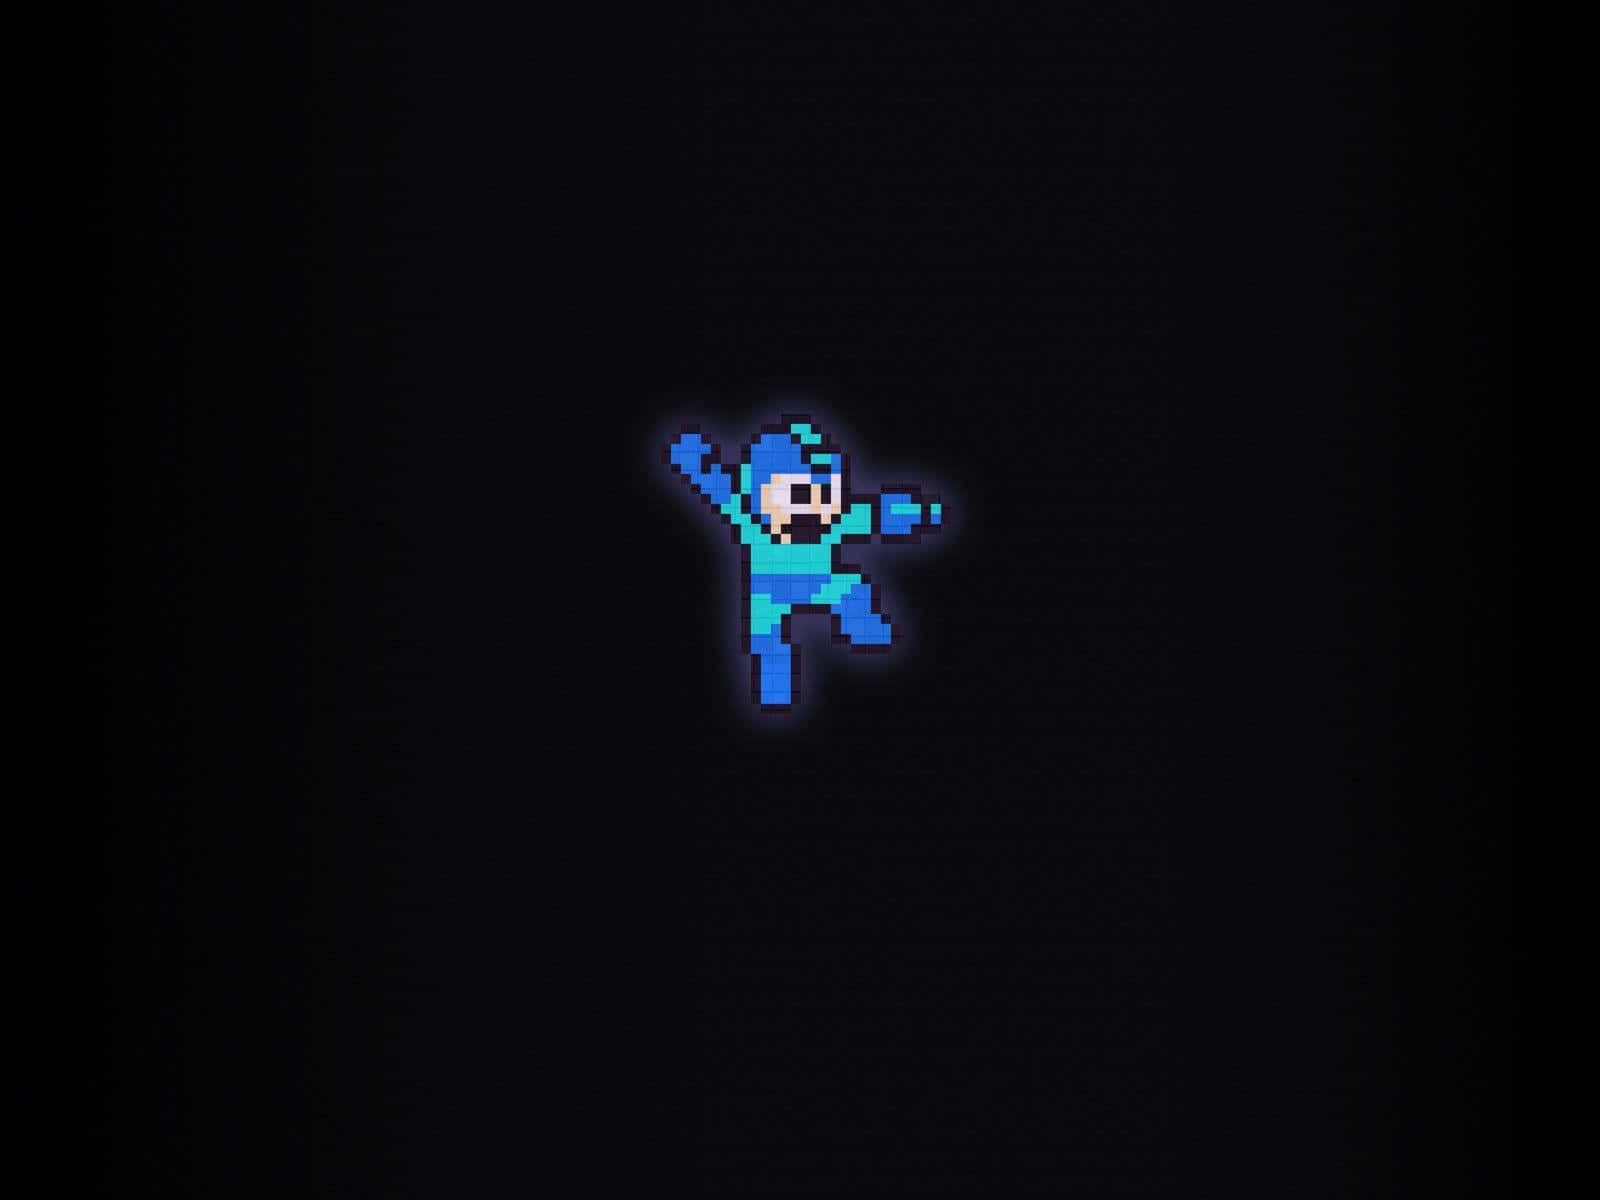 The iconic Mega Man traverses difficult levels in his never-ending quest to save the world. Wallpaper